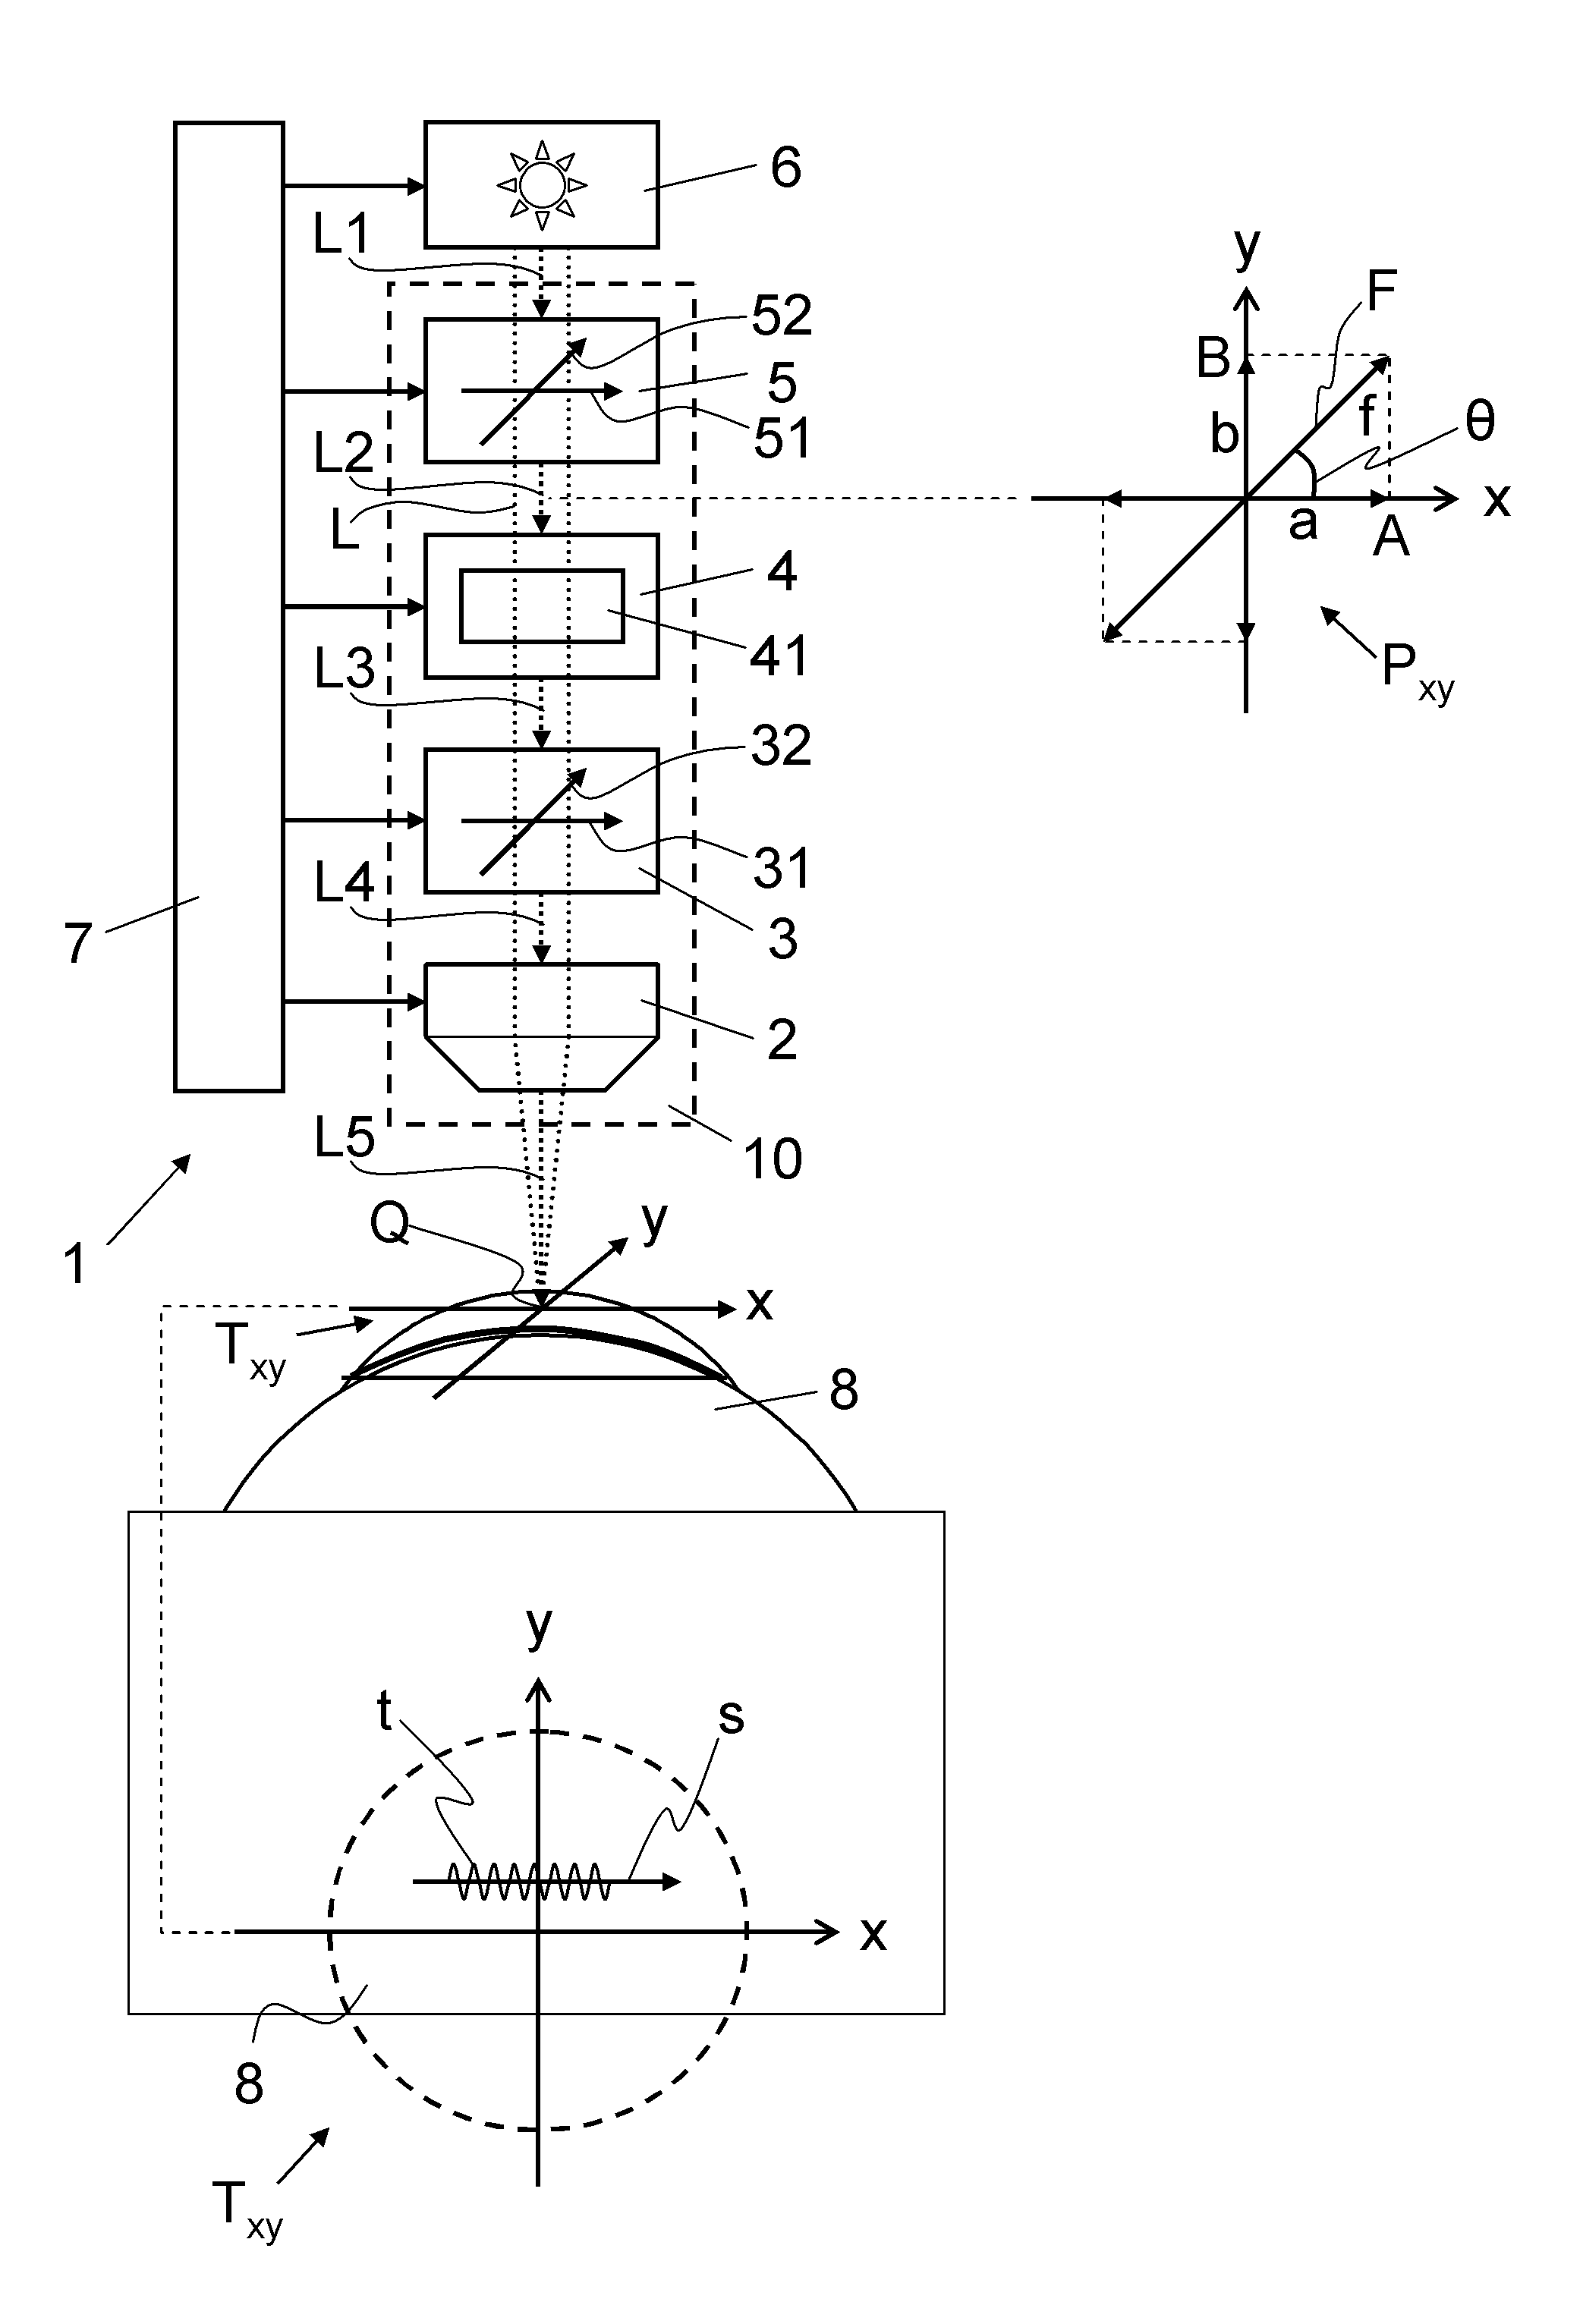 Device for processing eye tissue by means of femtosecond laser pulses